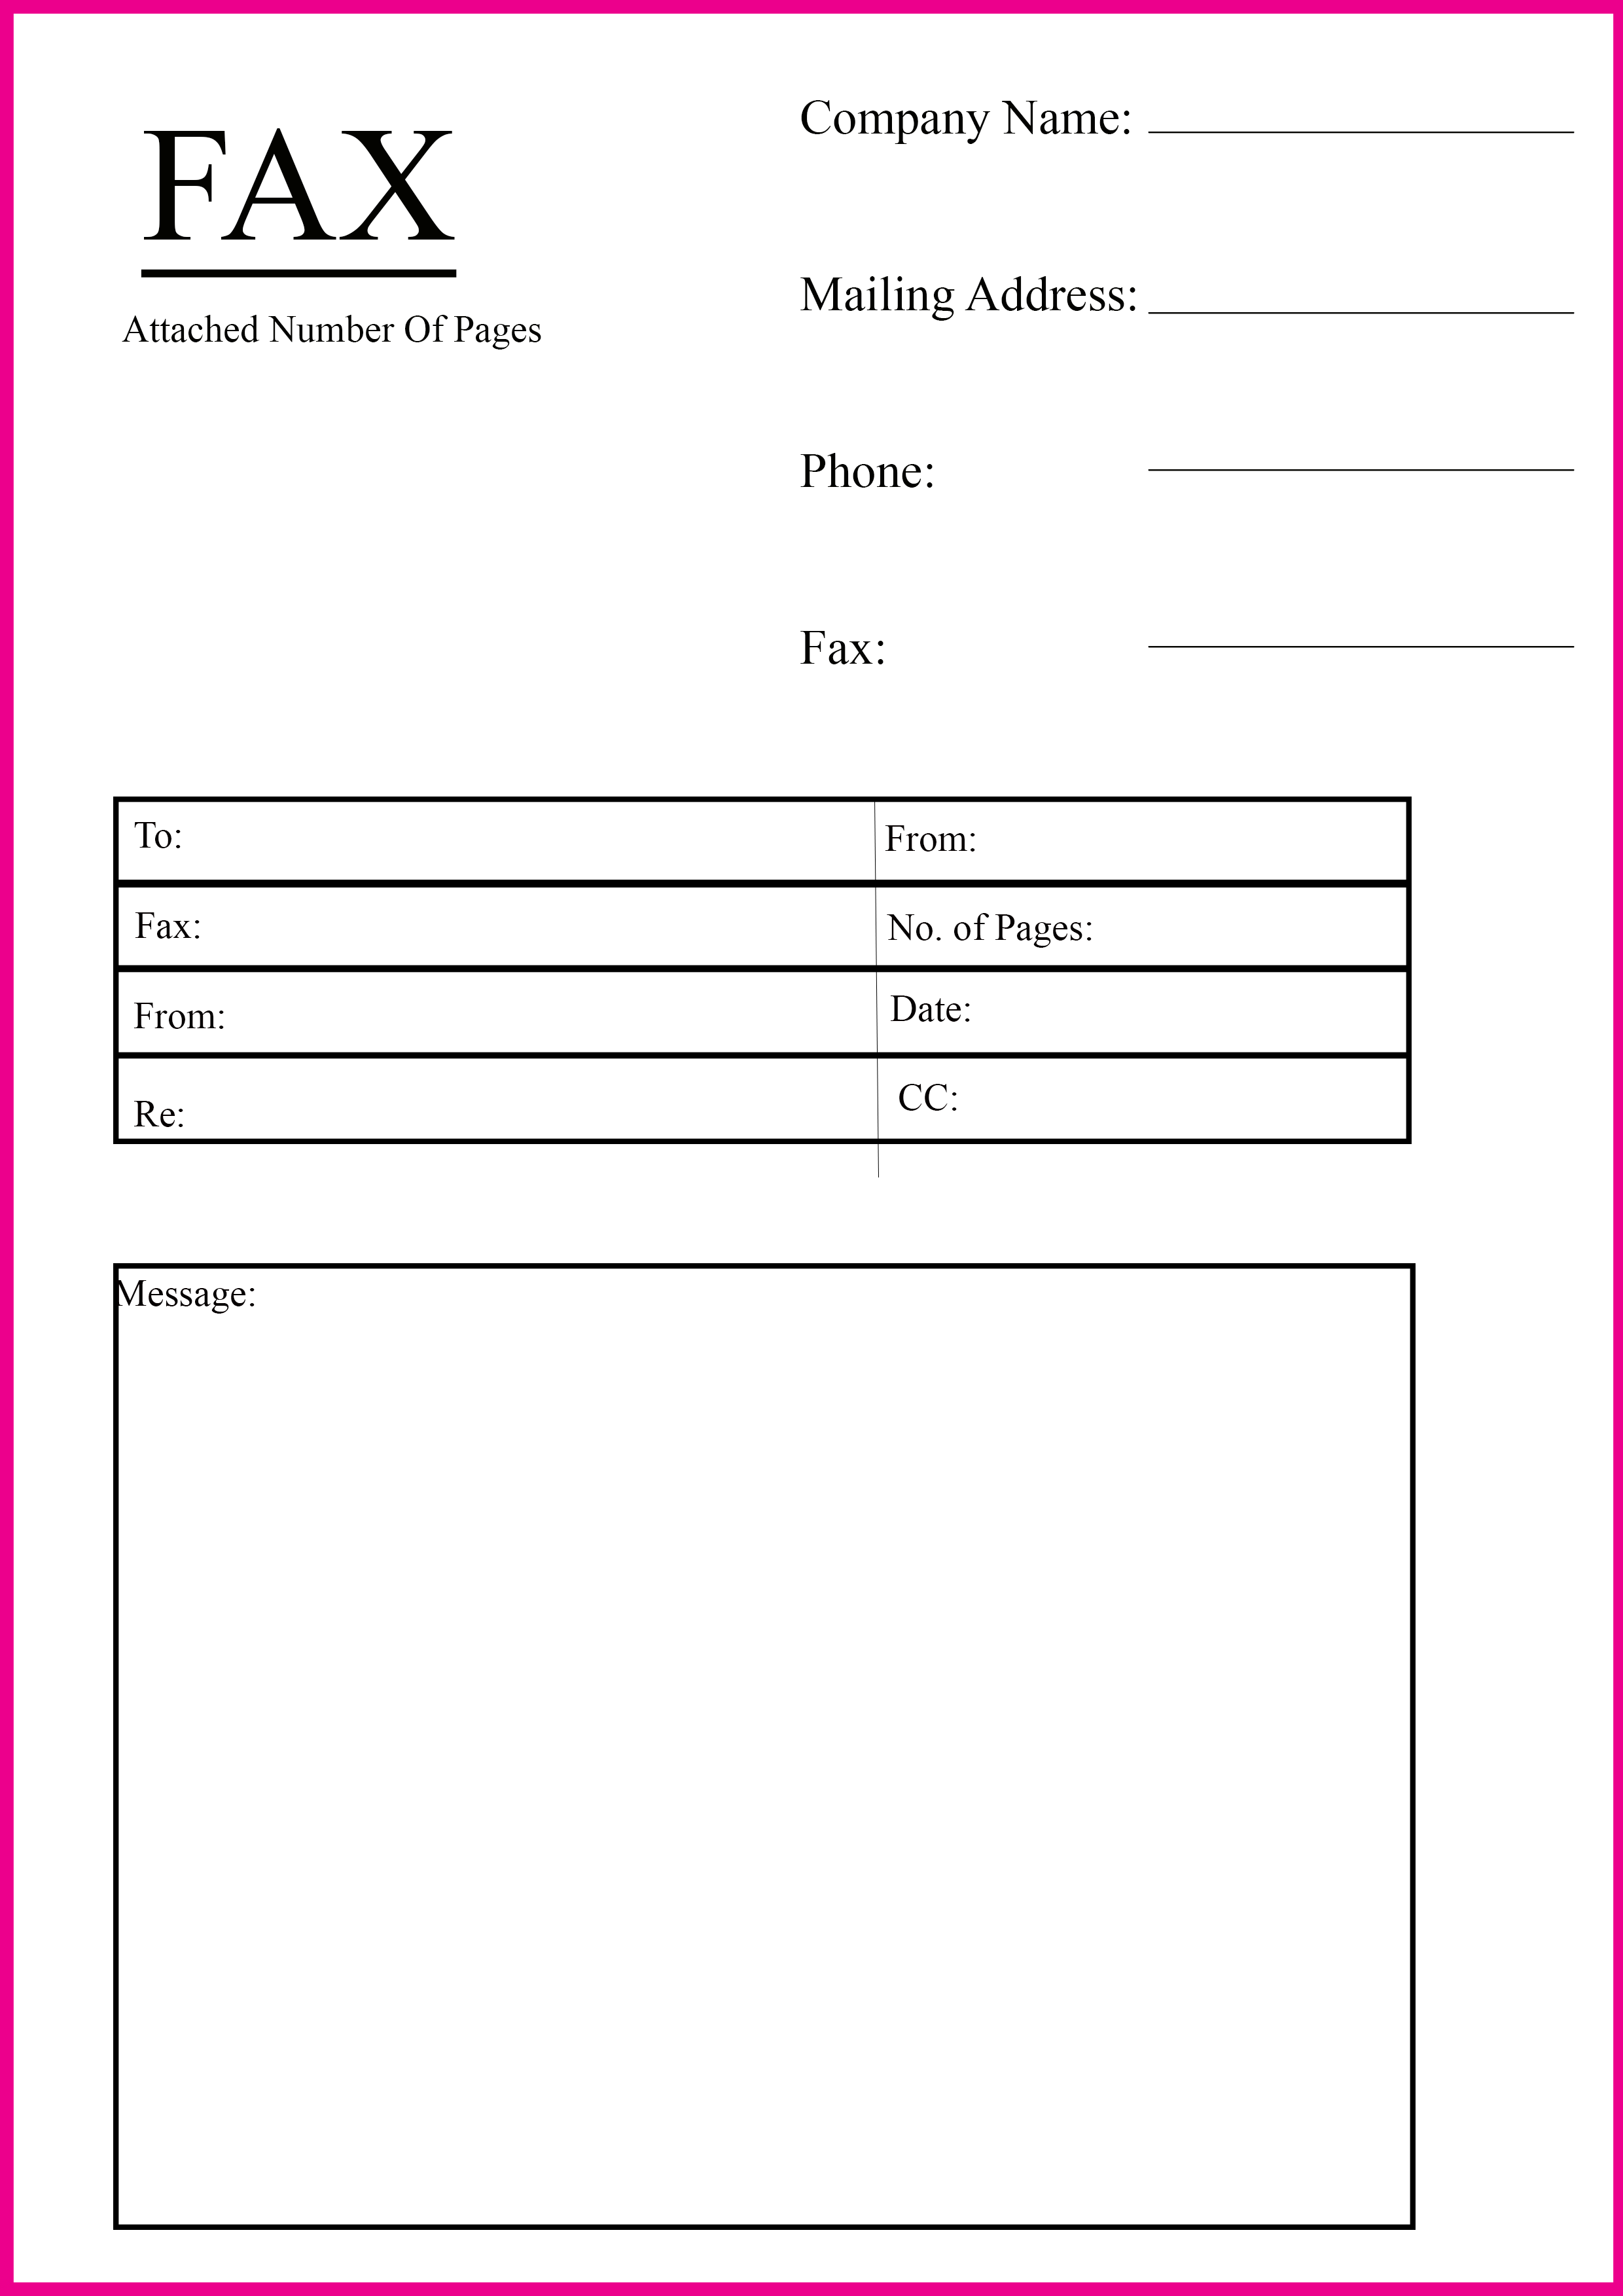 Personal Fax Cover Sheet or Letter Free Templates